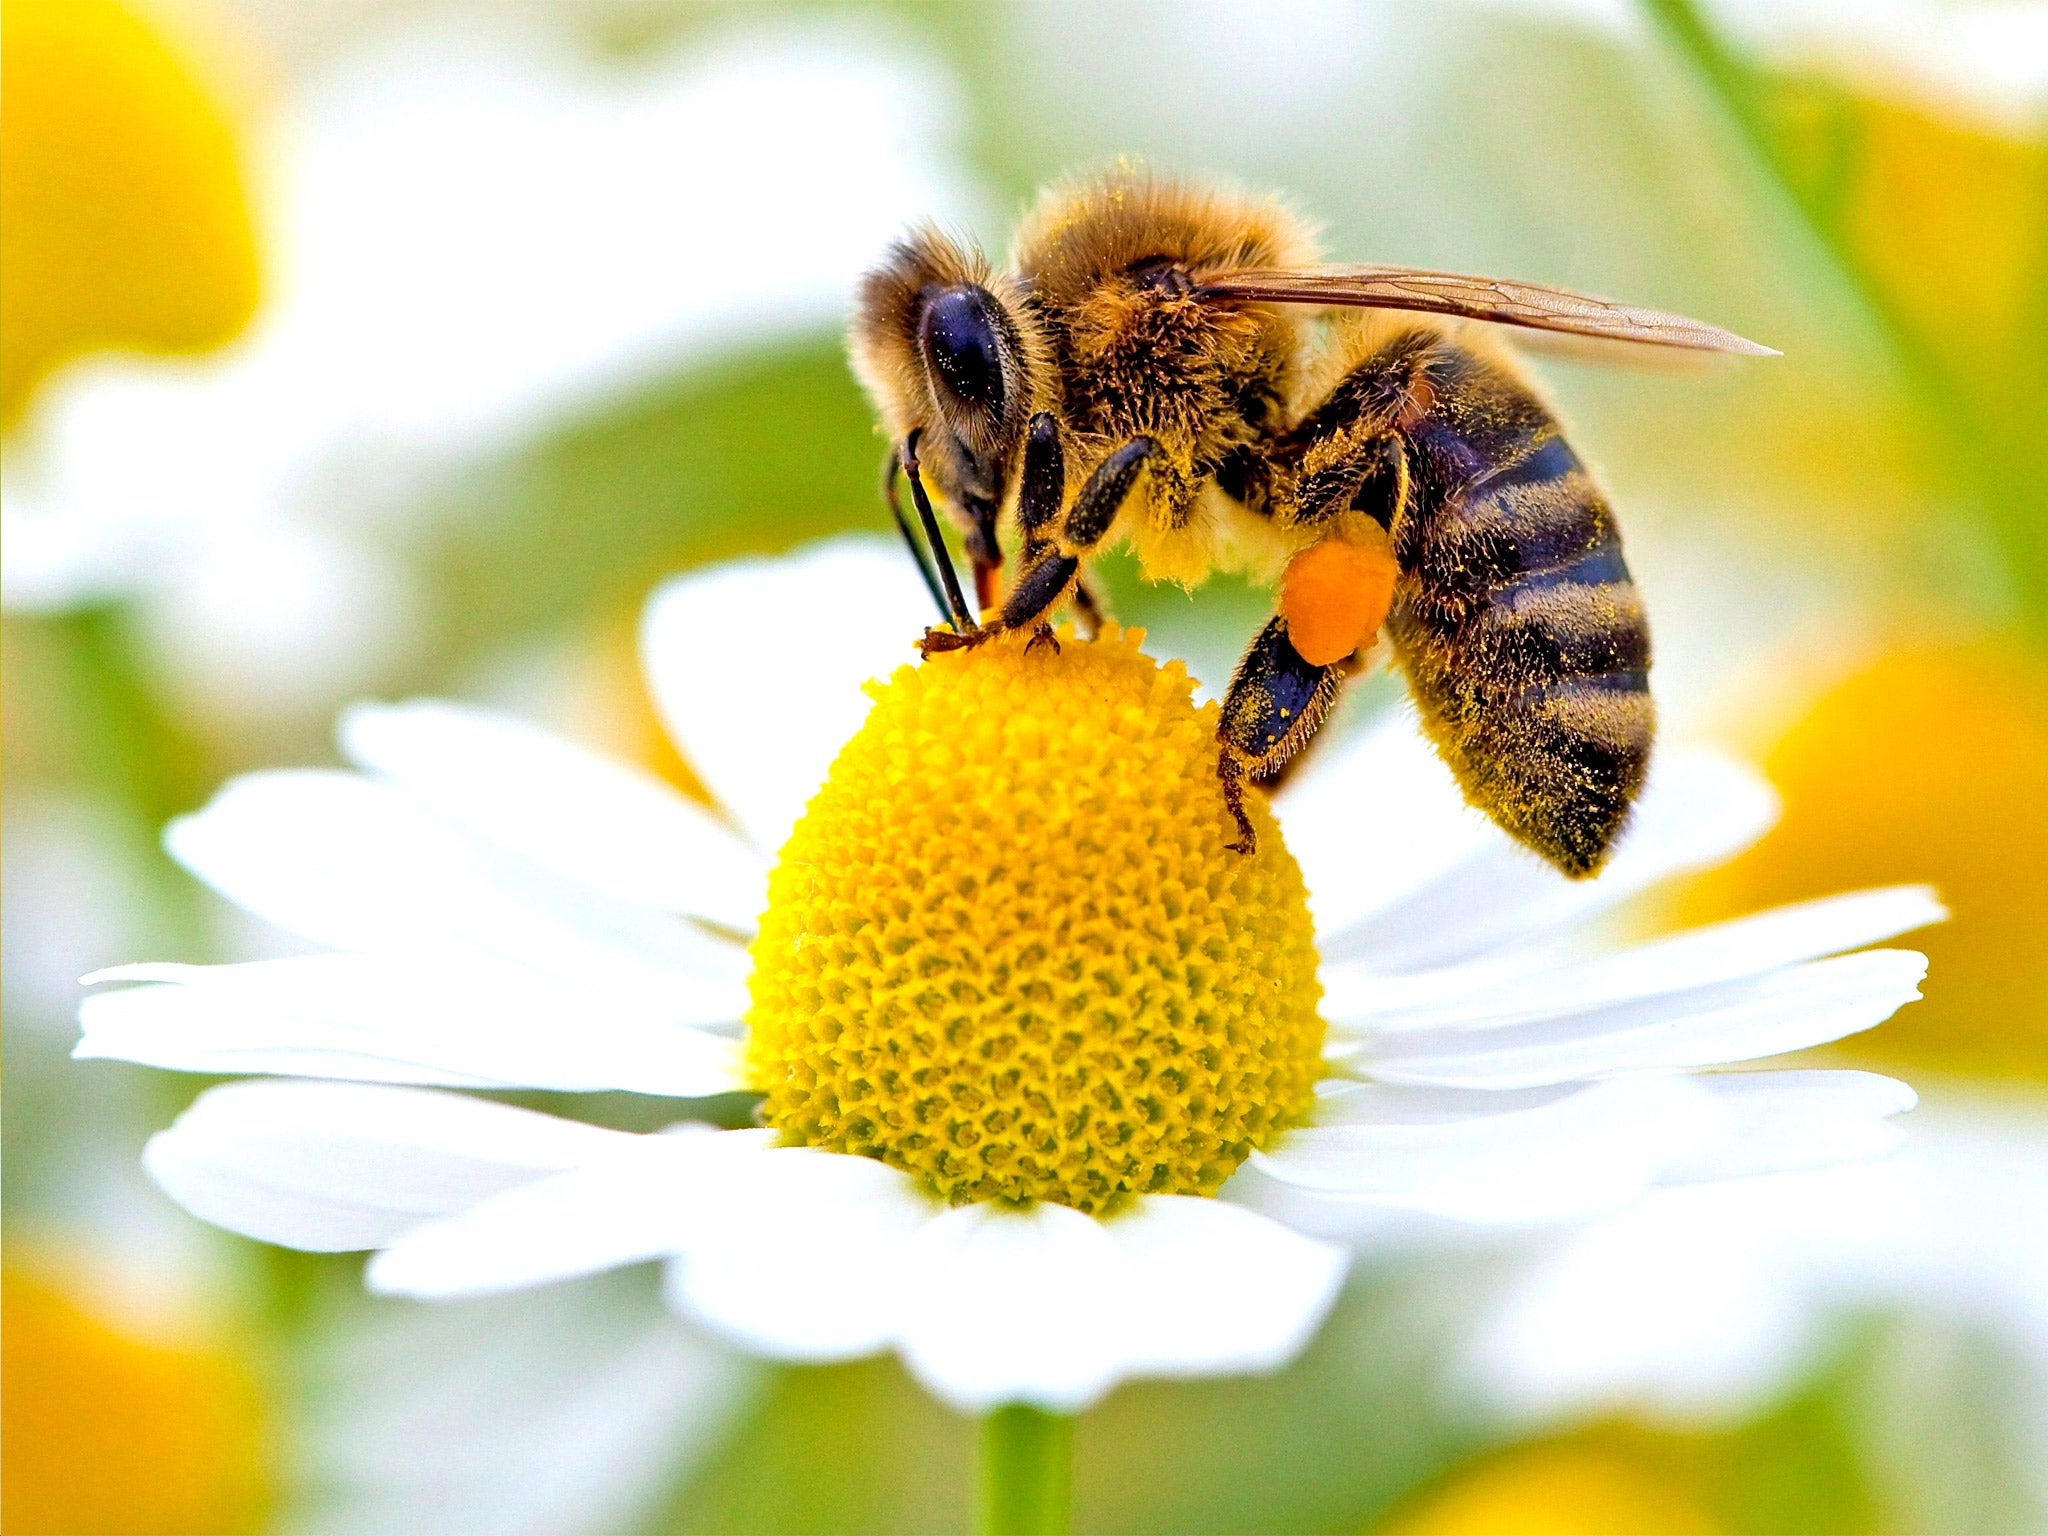 2 per cent of wild bee species now account for 80 per cent of global crop pollination